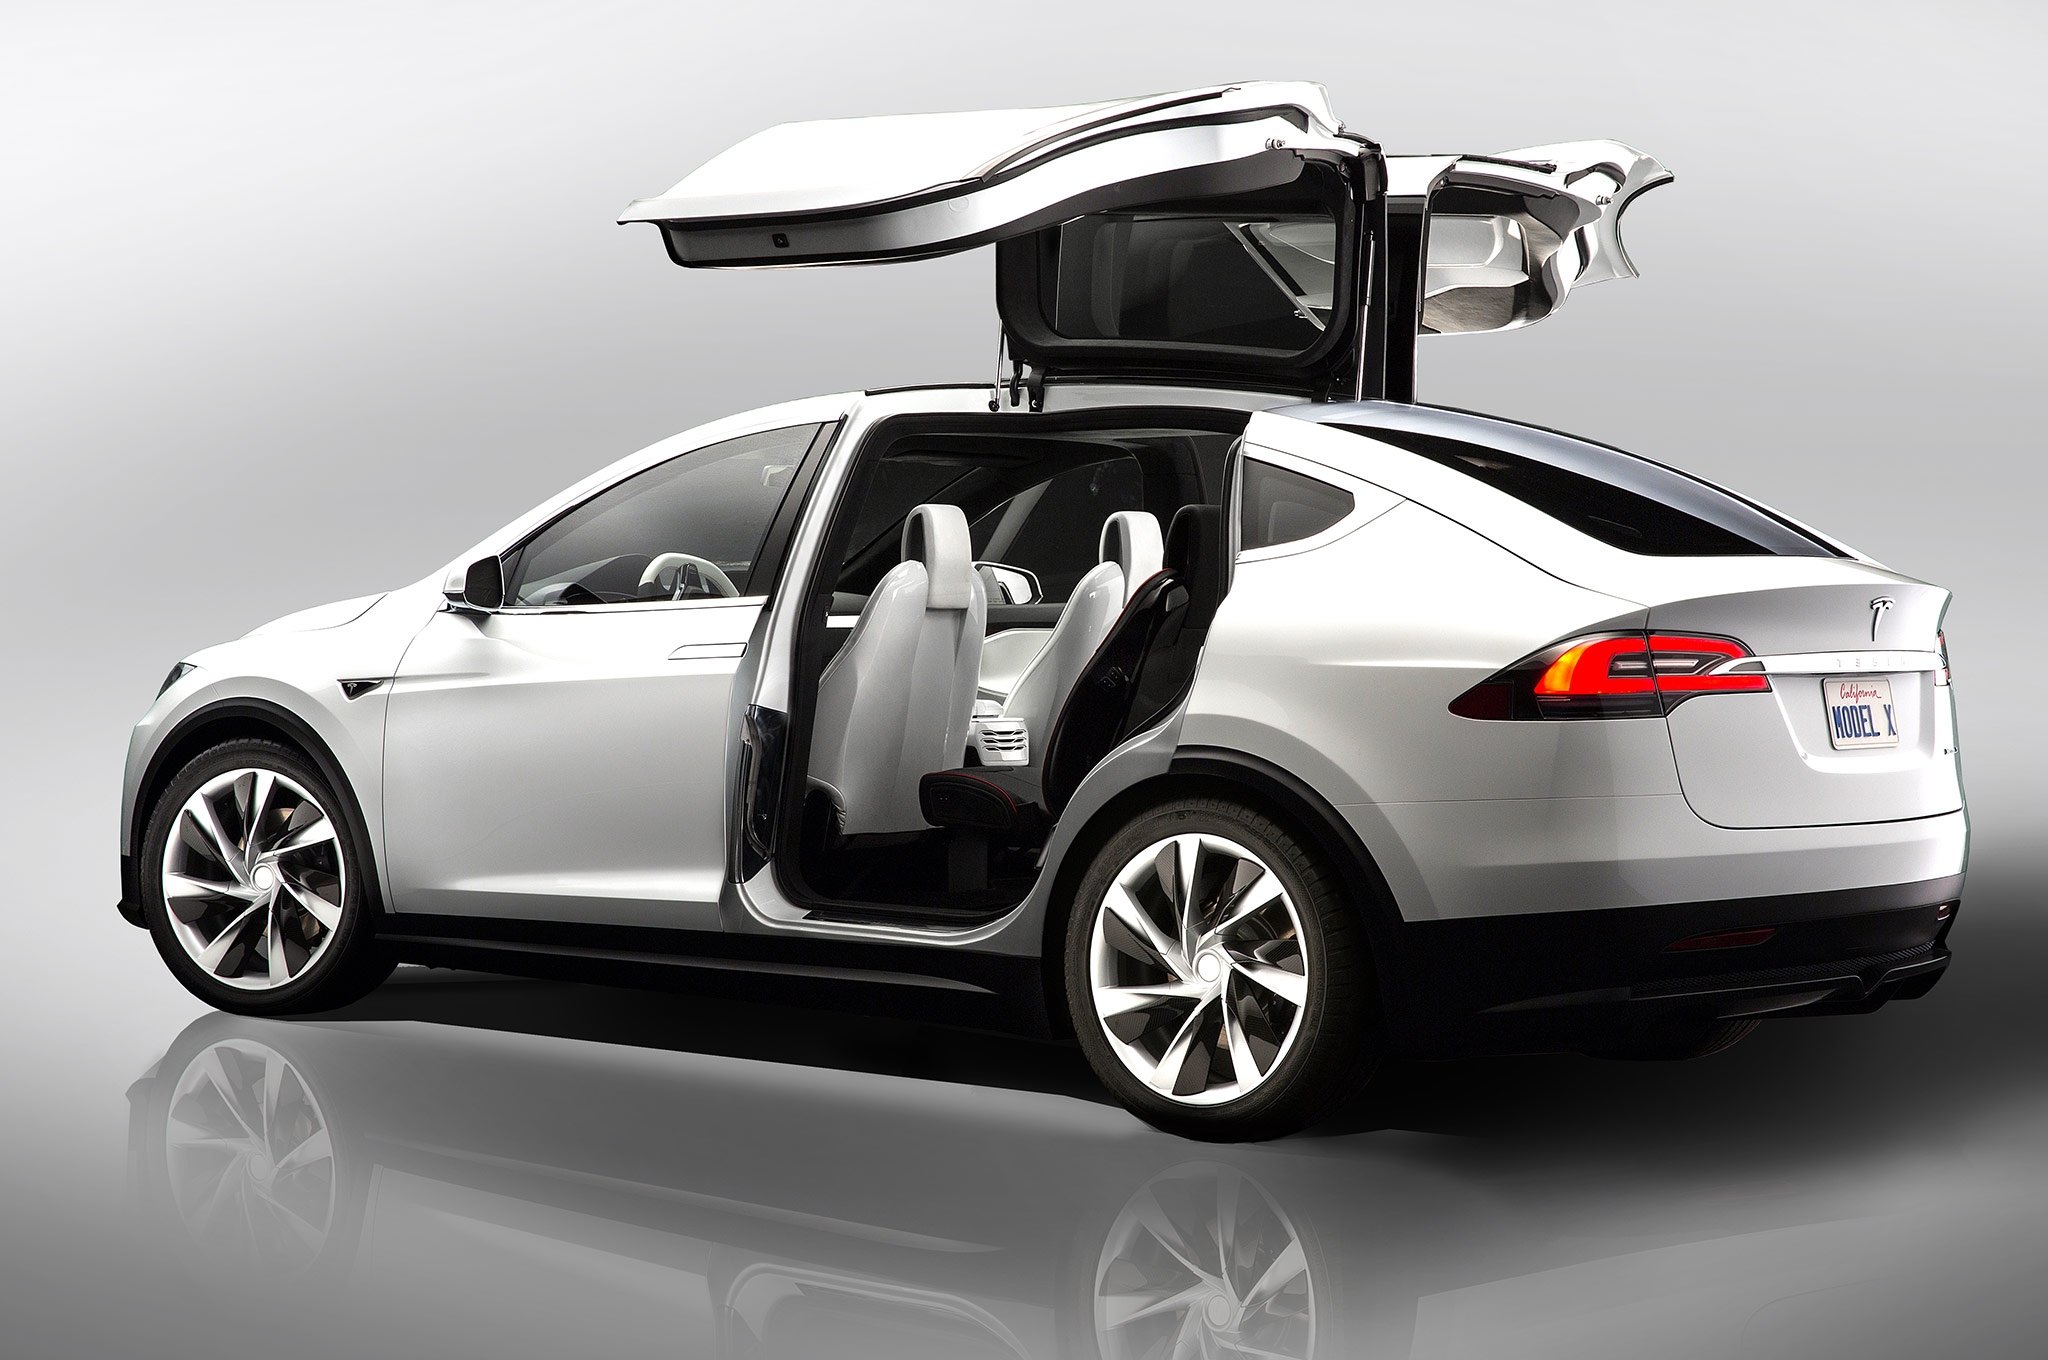 Model X Tesla Launches AllElectric SUV with Falcon Wing Doors